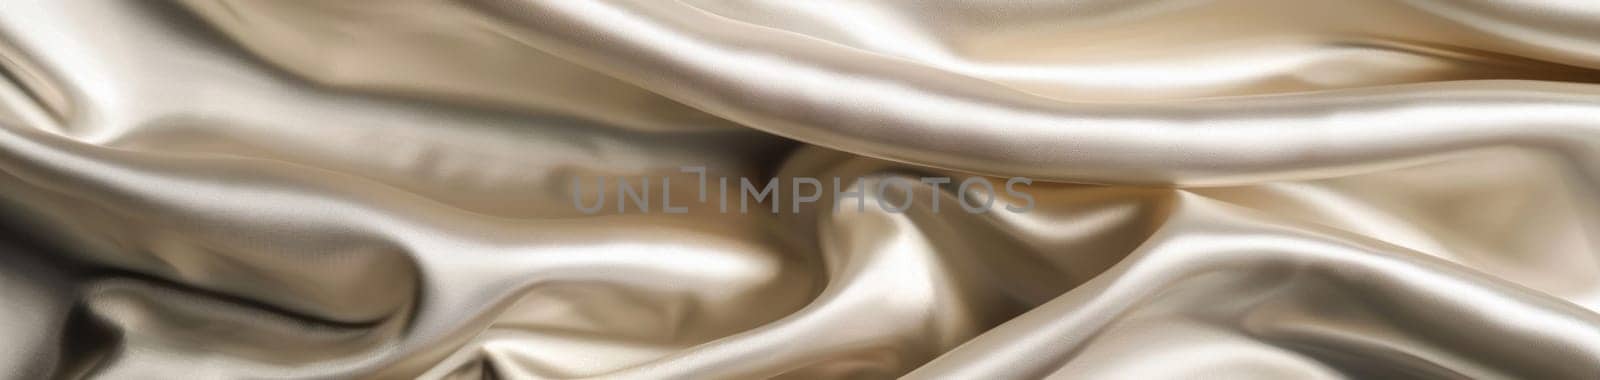 Smooth cream silk fabric in gentle waves, reflecting elegance and luxury